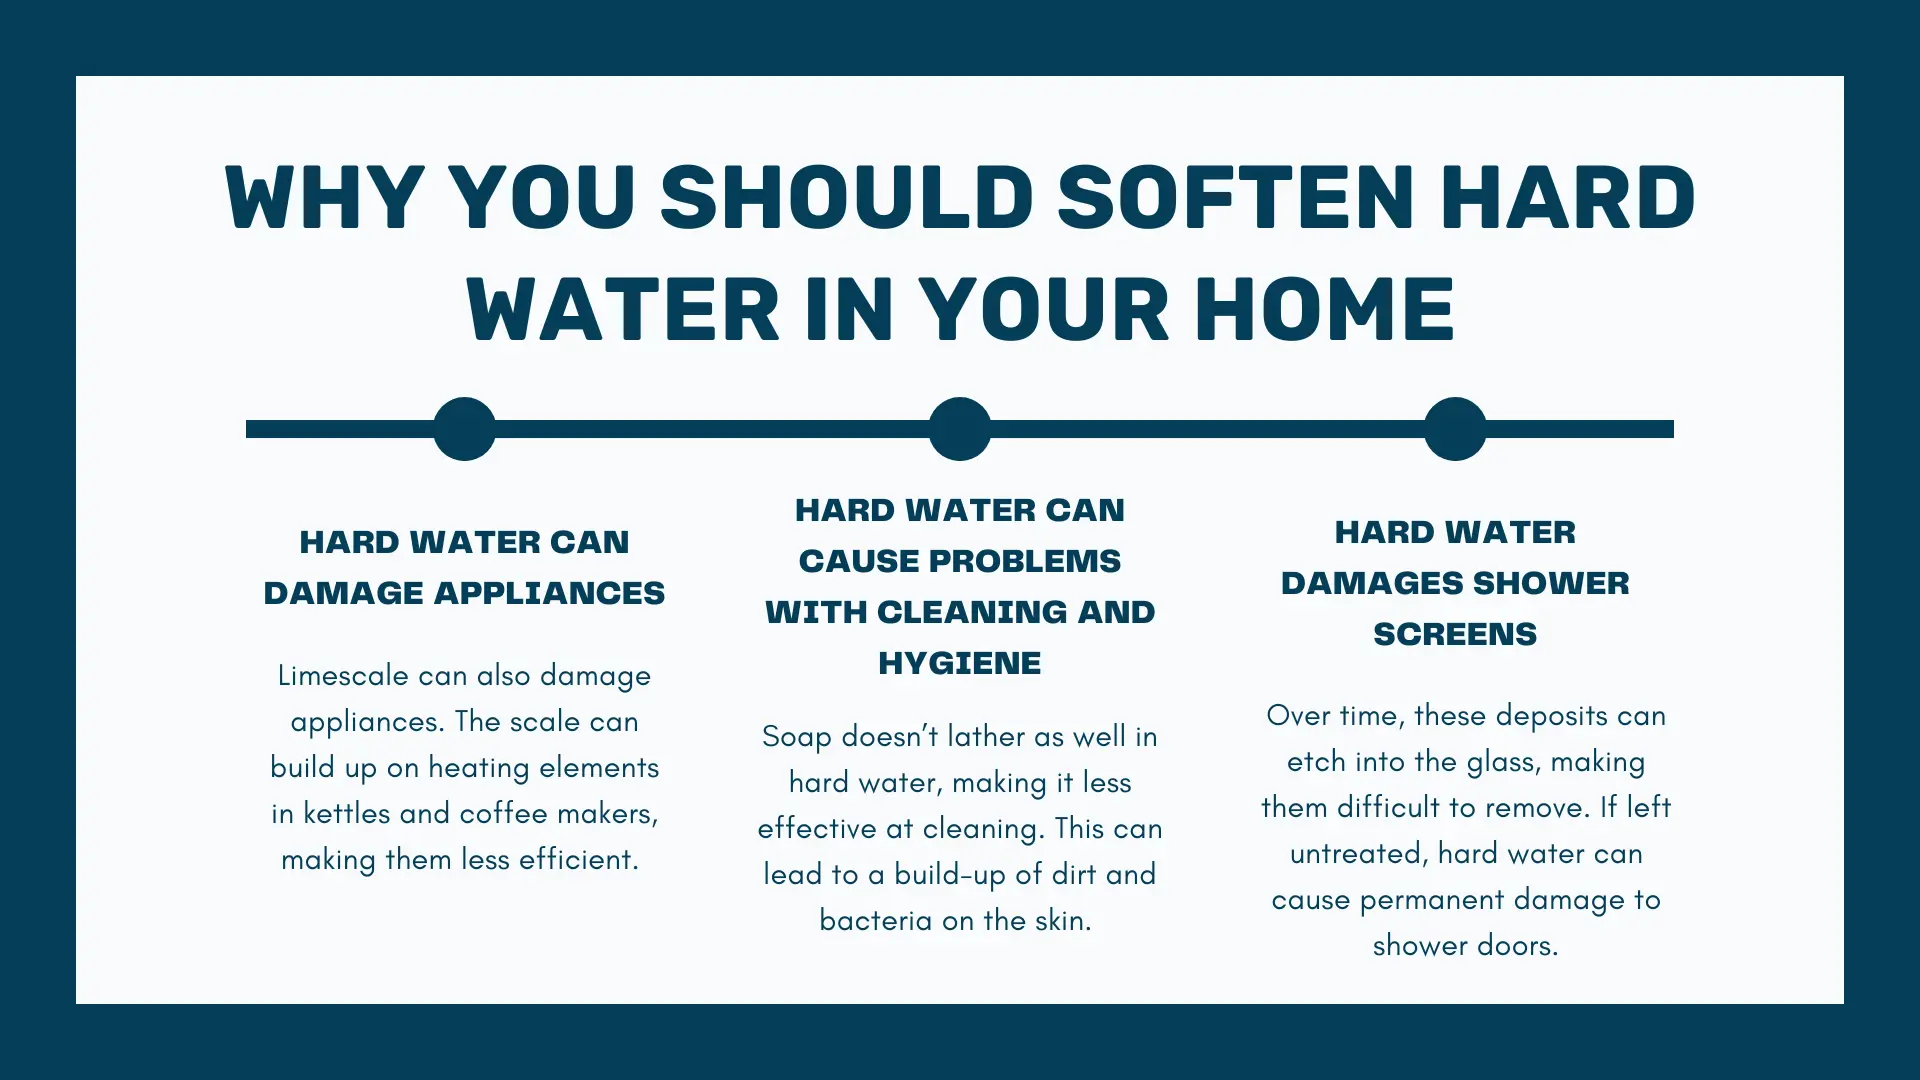 Why you should soften hard water in your home